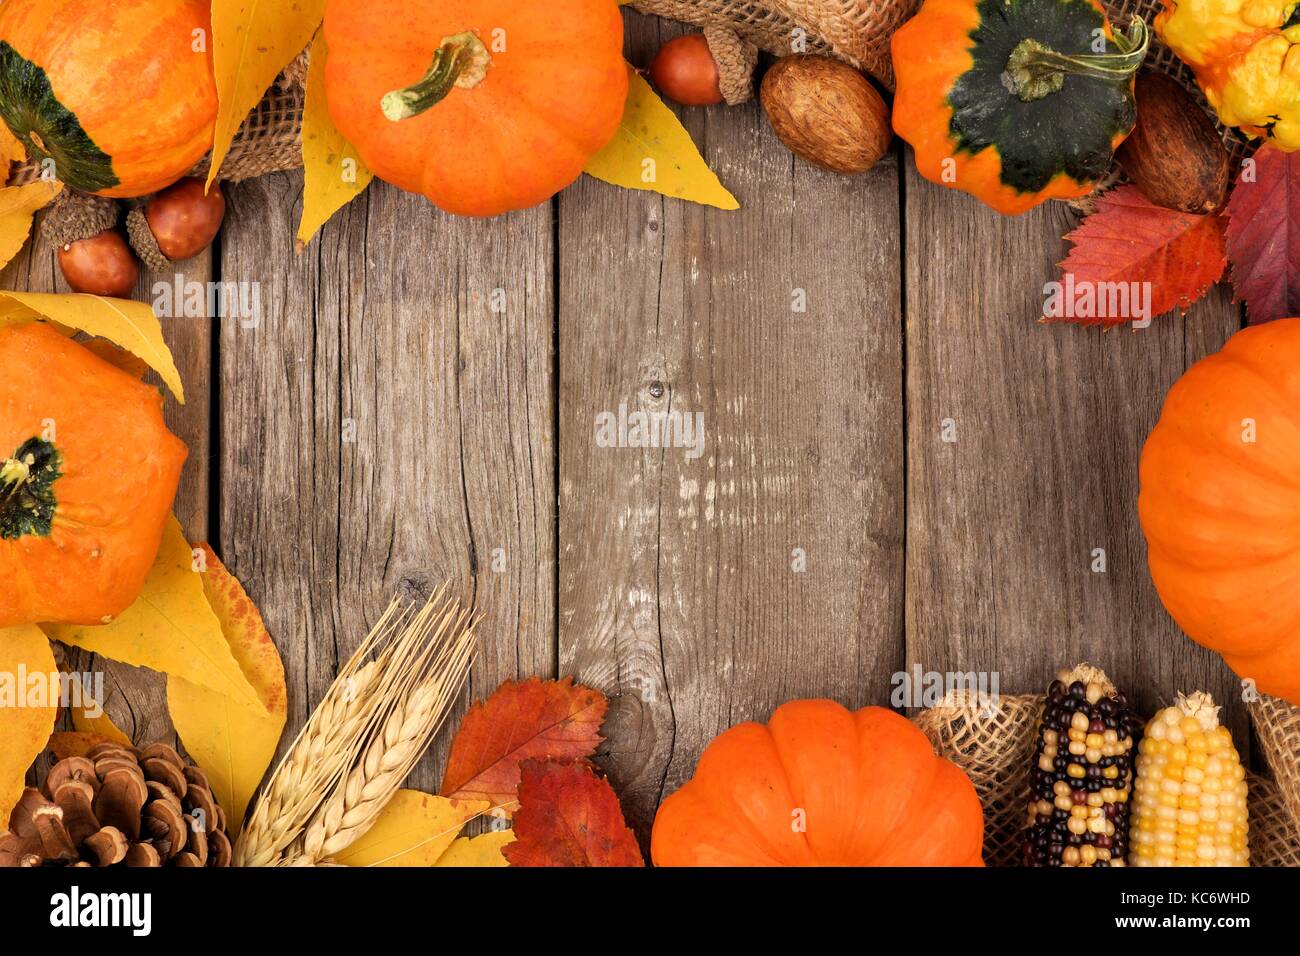 Autumn frame of colorful leaves and pumpkins over a rustic wood background Stock Photo